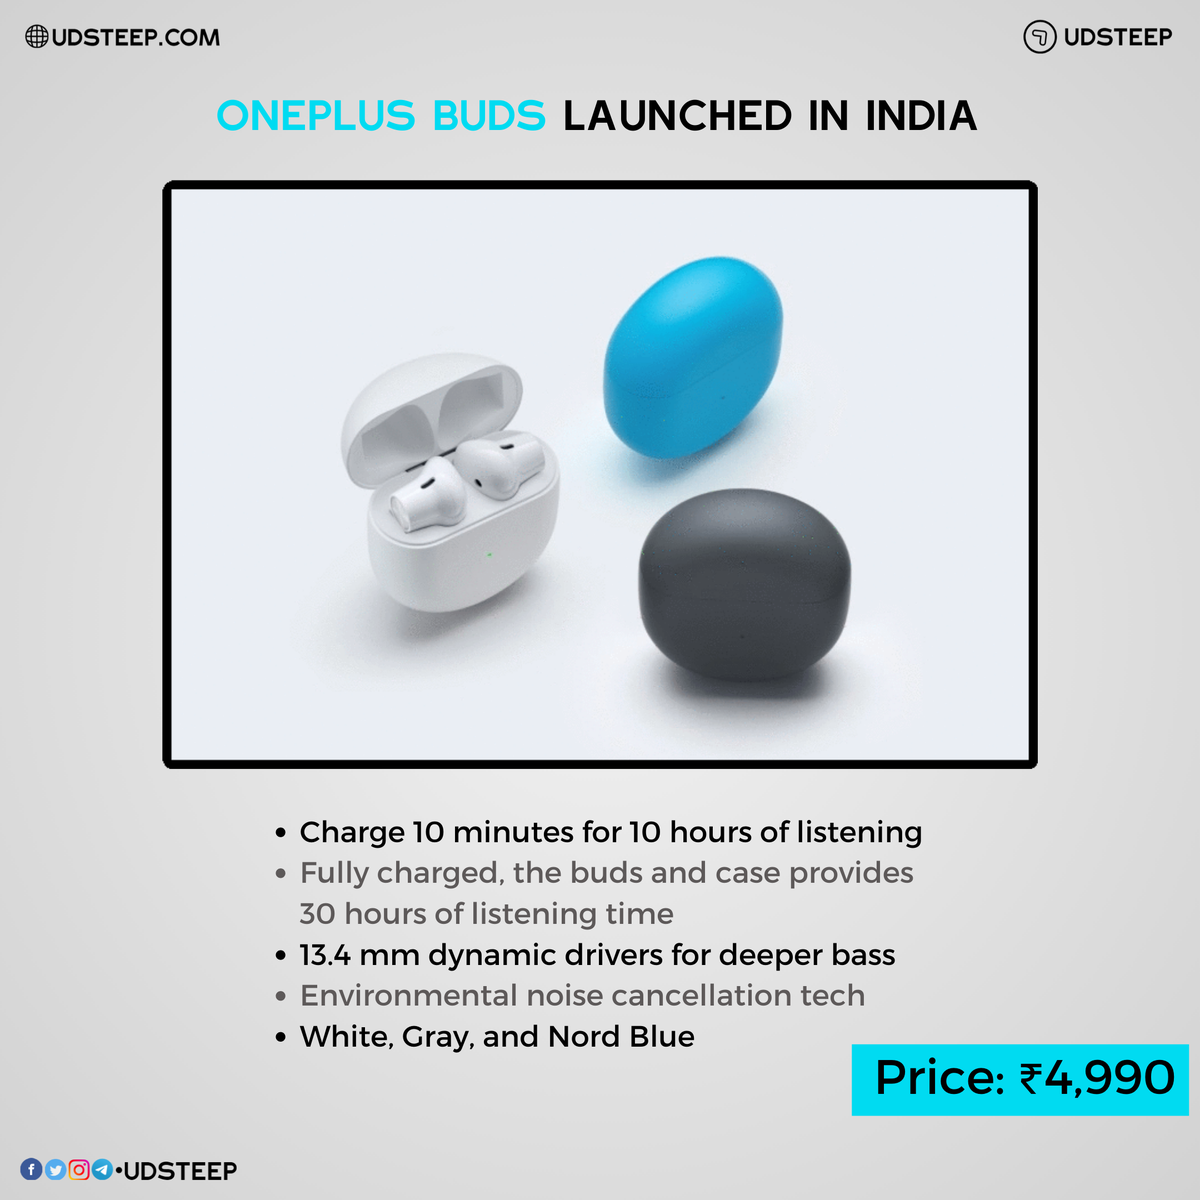 OnePlus Nord will be available from 4th August

6GB/64GB - 24,999INR variant will be available in September

#OnePlusNord #OnePlusNordAR #OnePlusBuds #OnePlusNordLaunchEvent #OnePlus #NeverSettle #India
#UDSTEEP